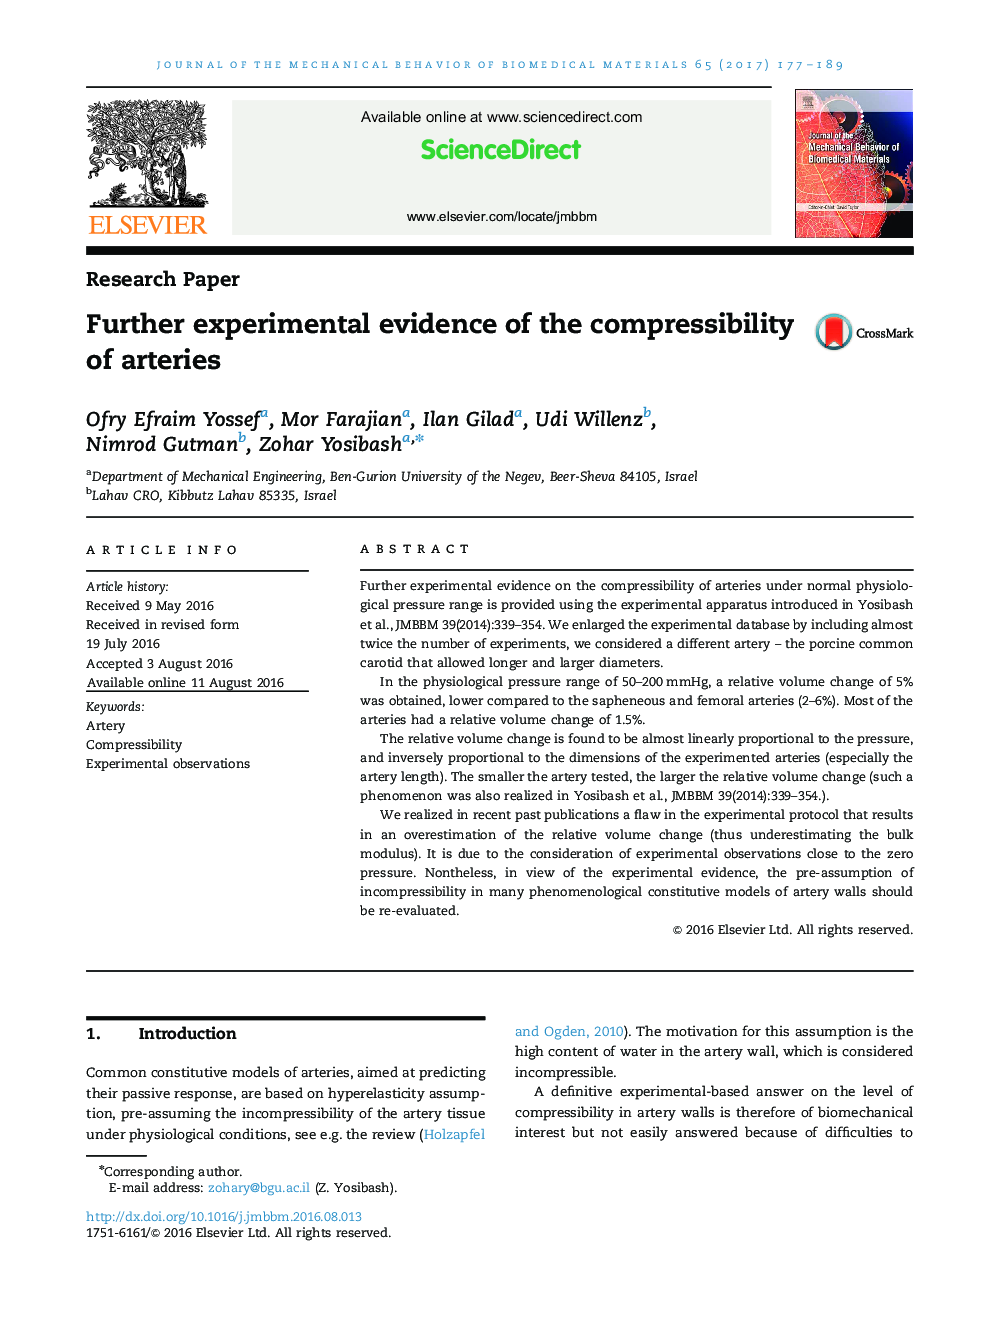 Further experimental evidence of the compressibility of arteries